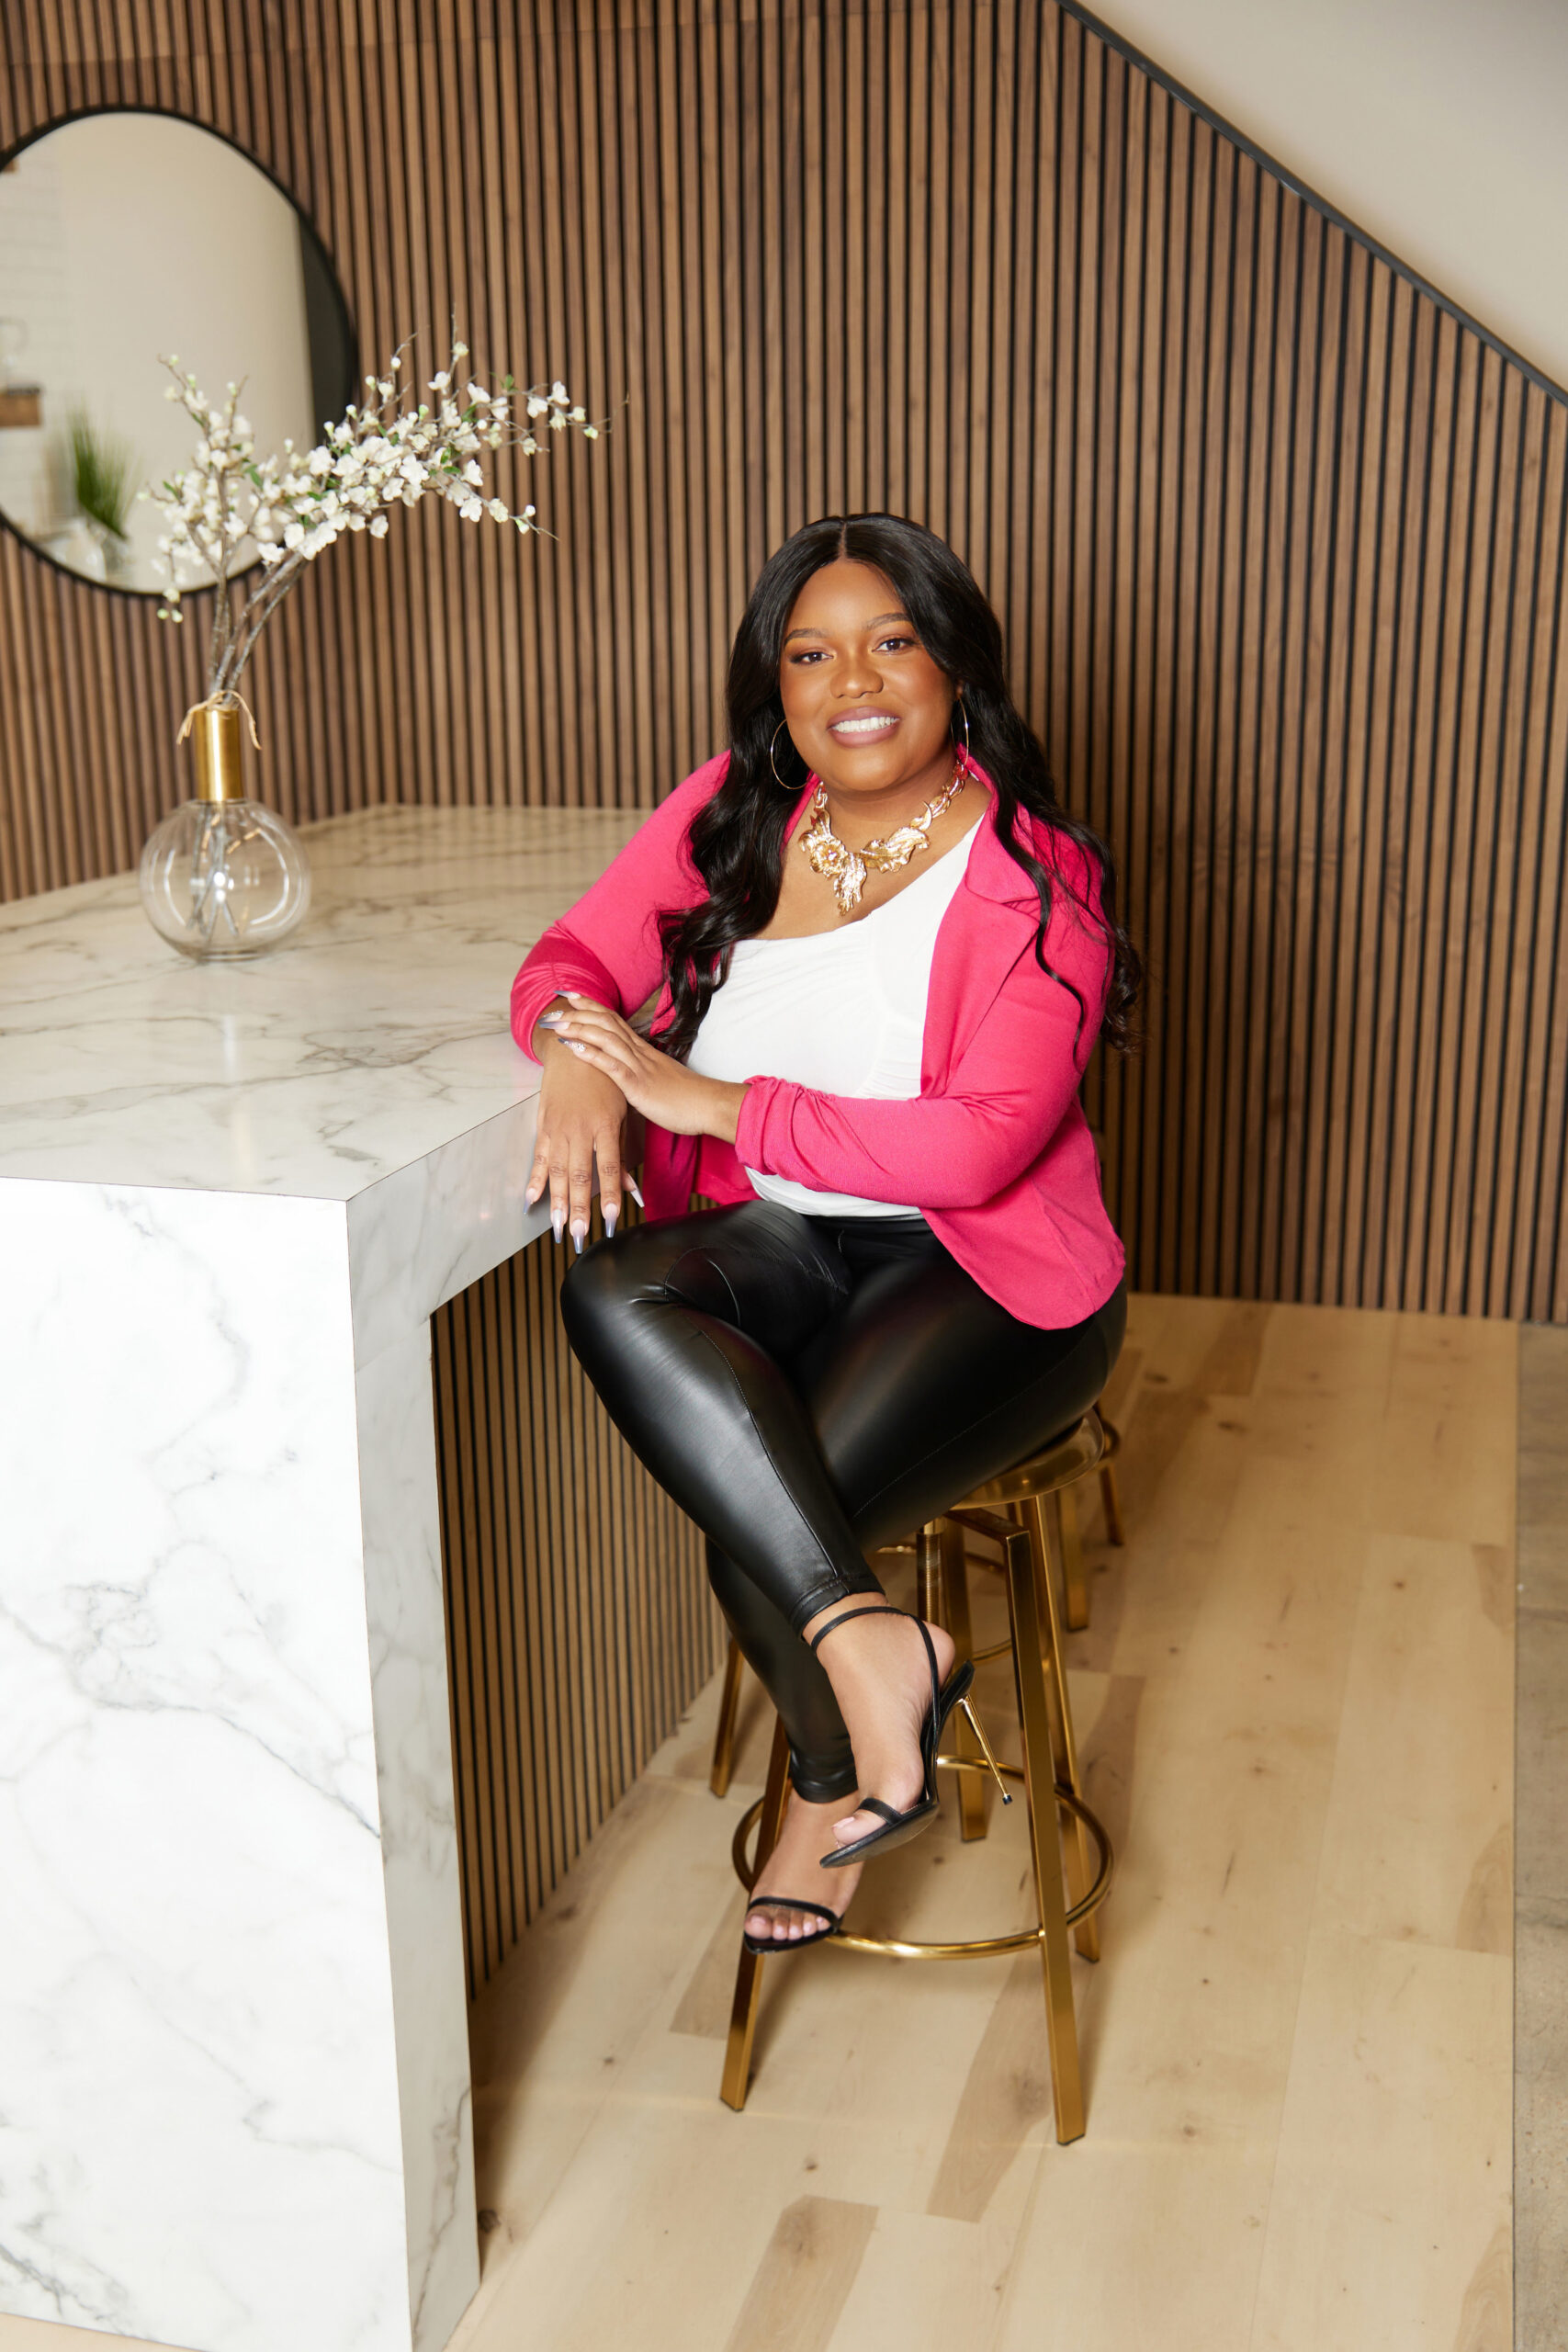 Honey Beez Natural Hair Care CEO / Founder Brandi Biviens is Solidifying her Position as One of the Best Black-Owned Hair-Care Brands in the Hair Care Industry!